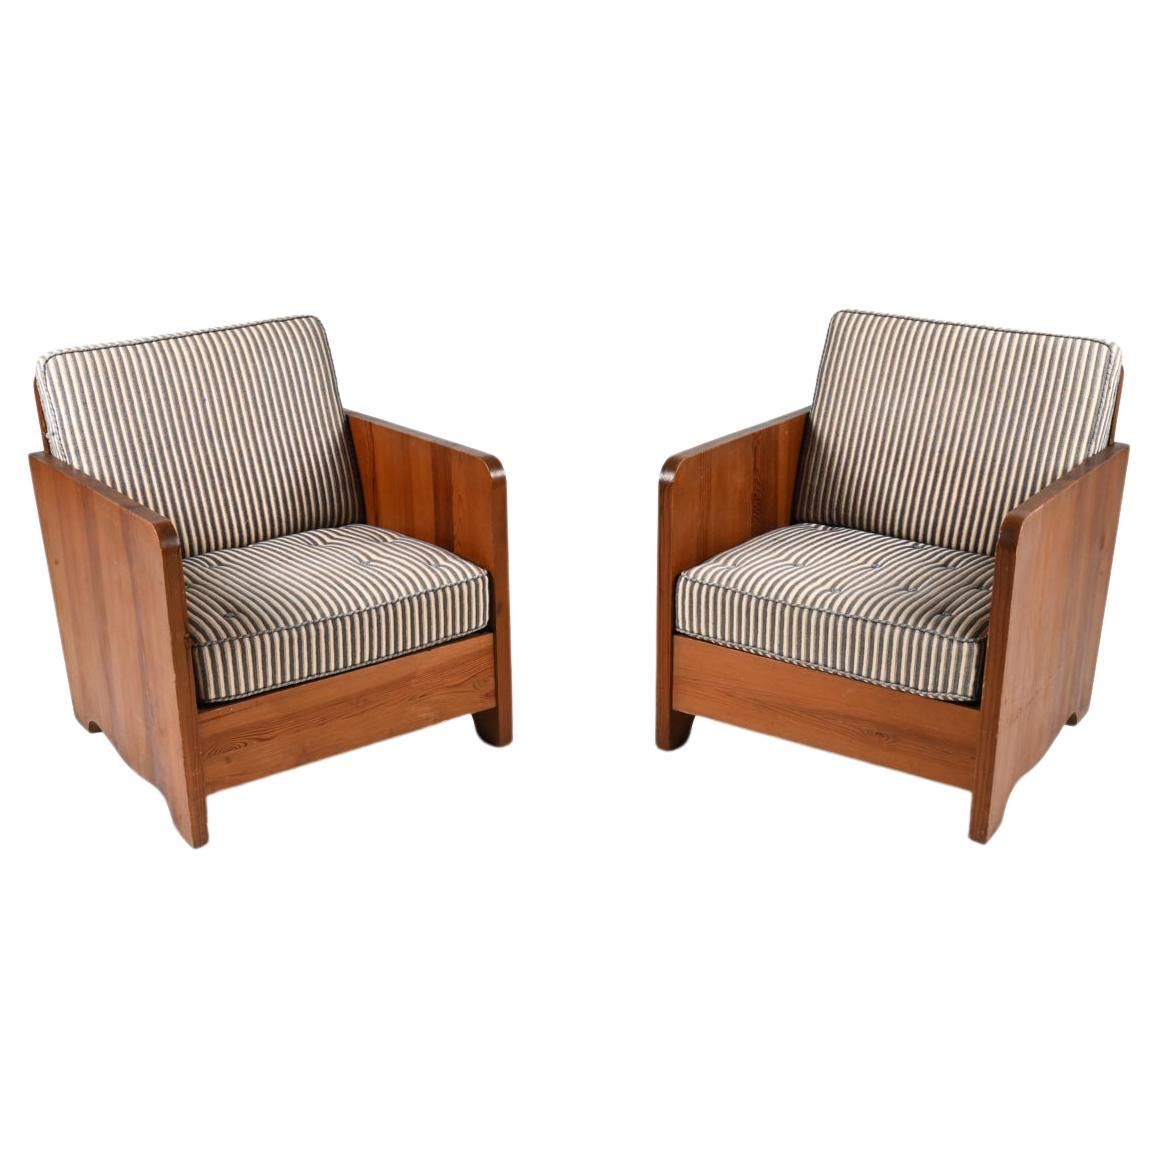 Pair of Scandinavian Pine Easy Chairs Attributed to Axel Einar Hjorth For Sale